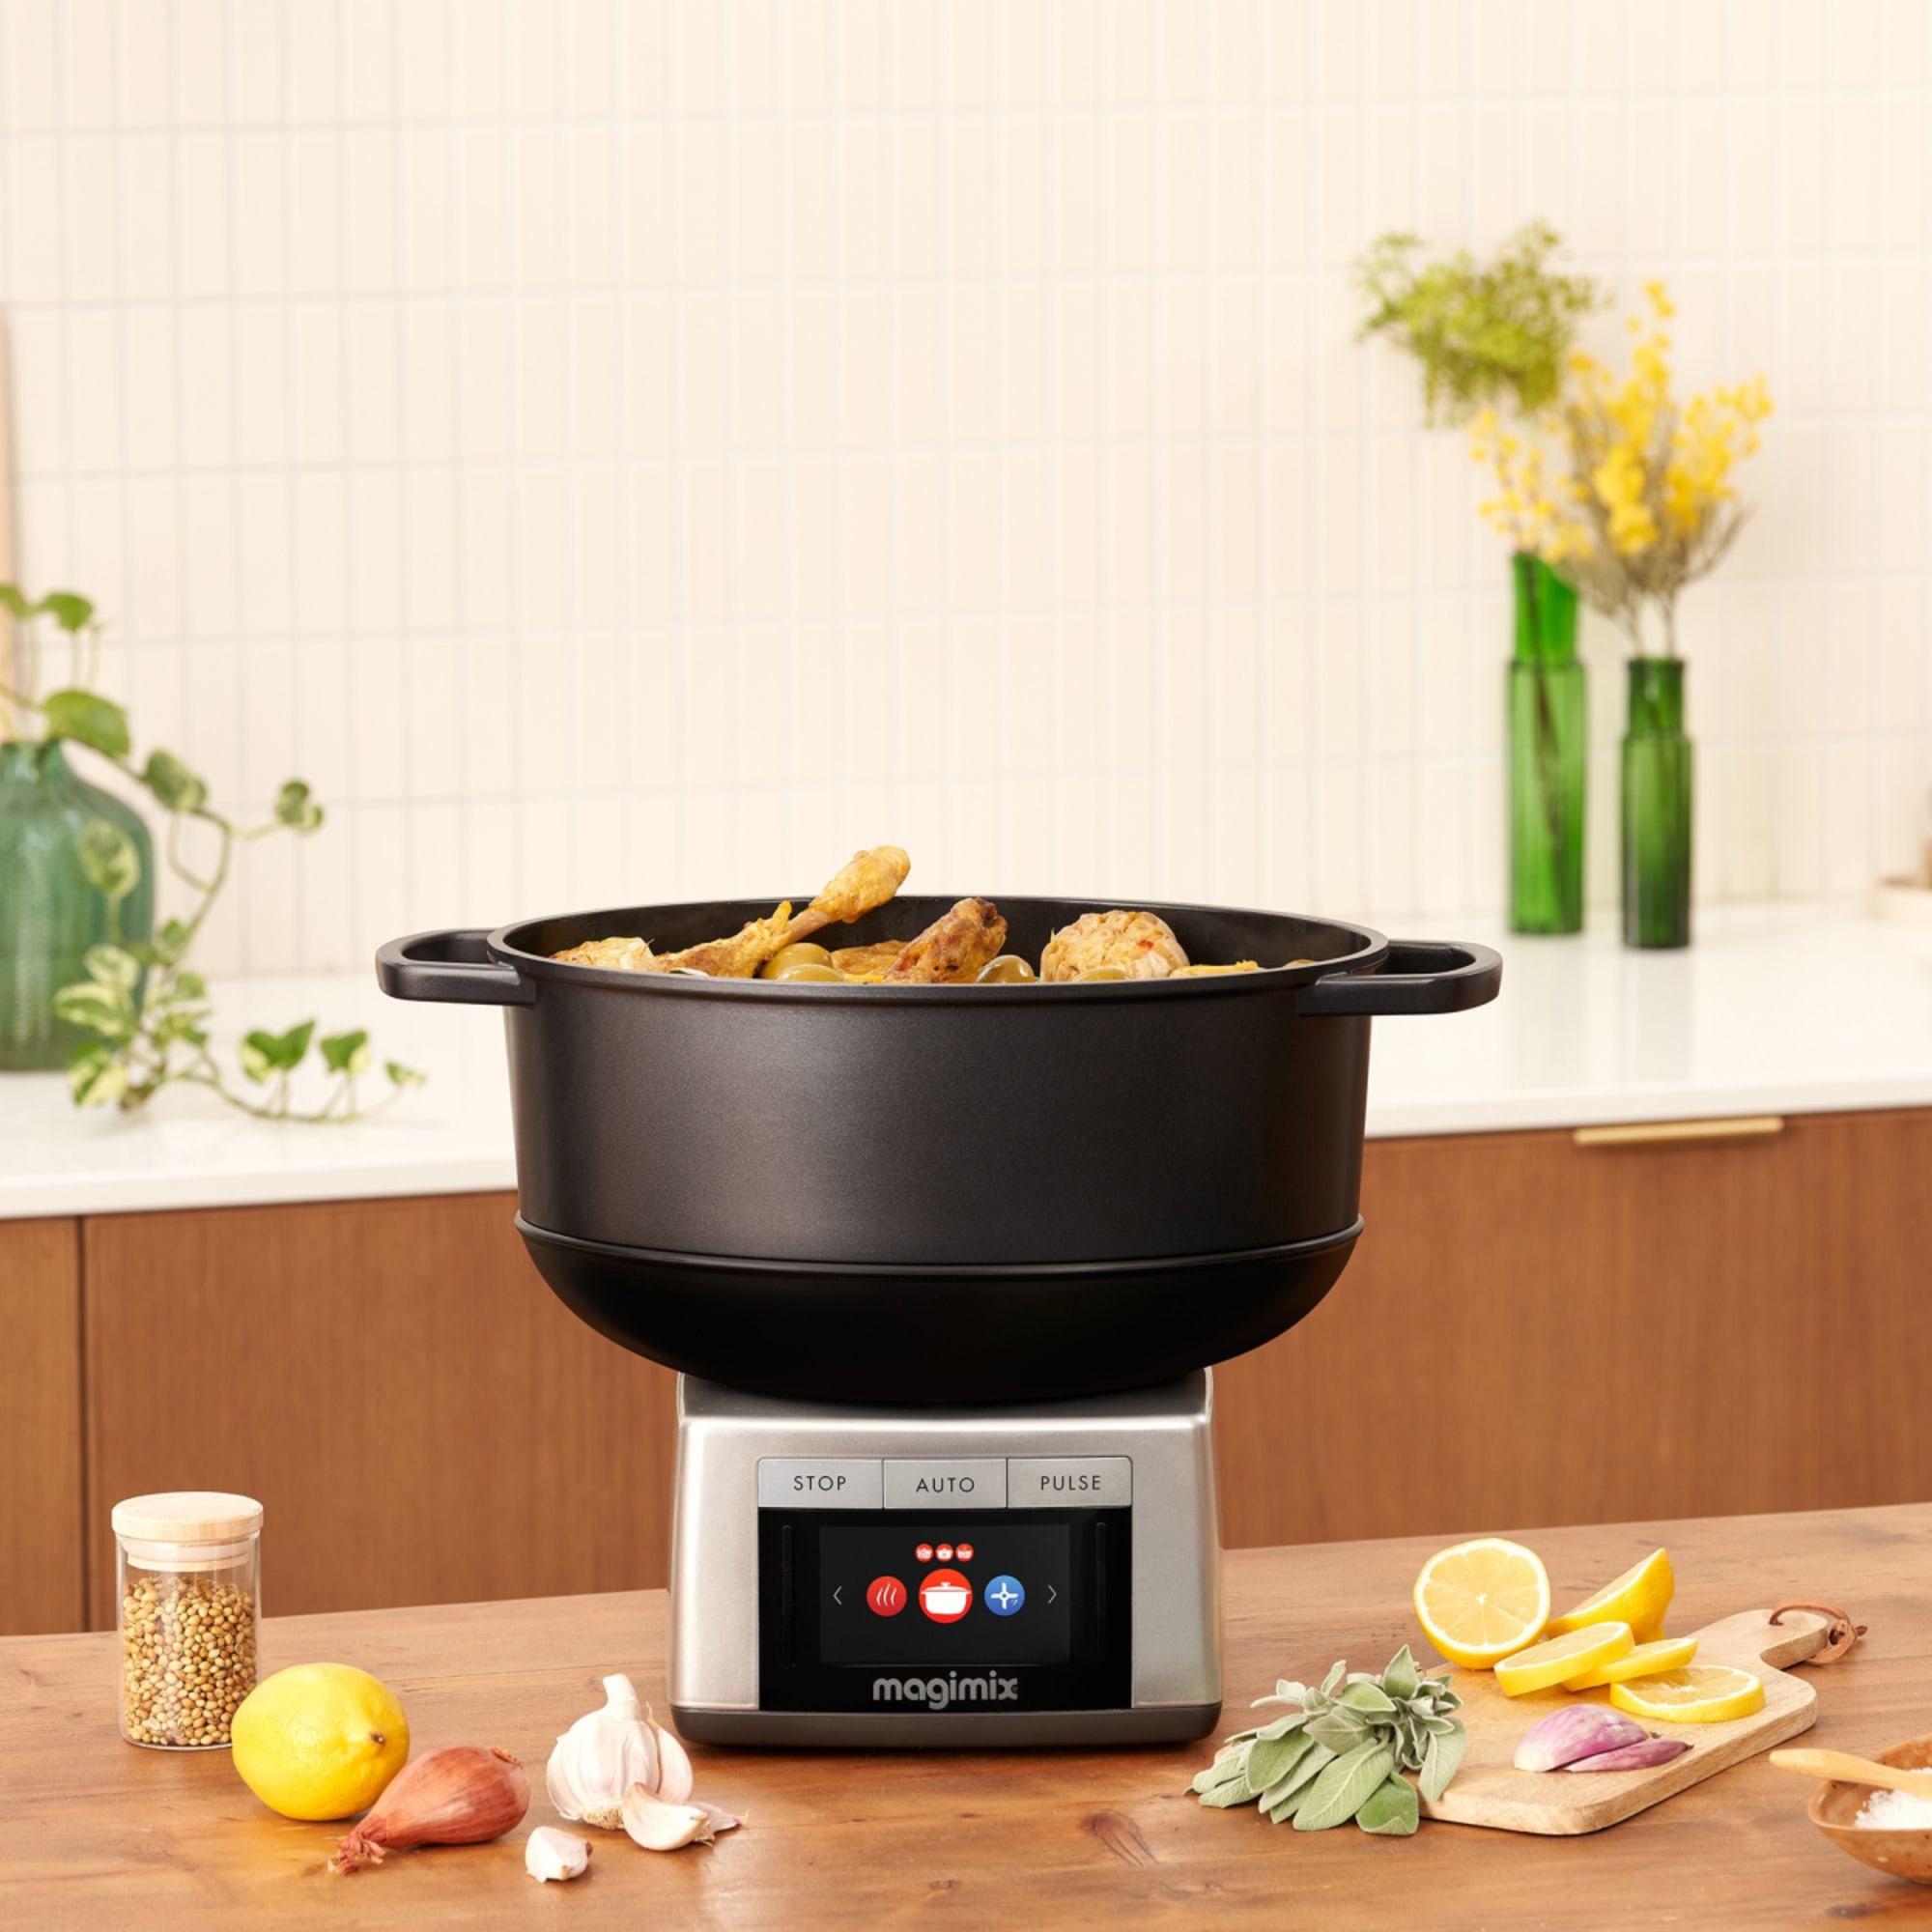 Magimix Cocotte Expert Slow Cooking Accessory for Cook Expert 7L Black Image 12